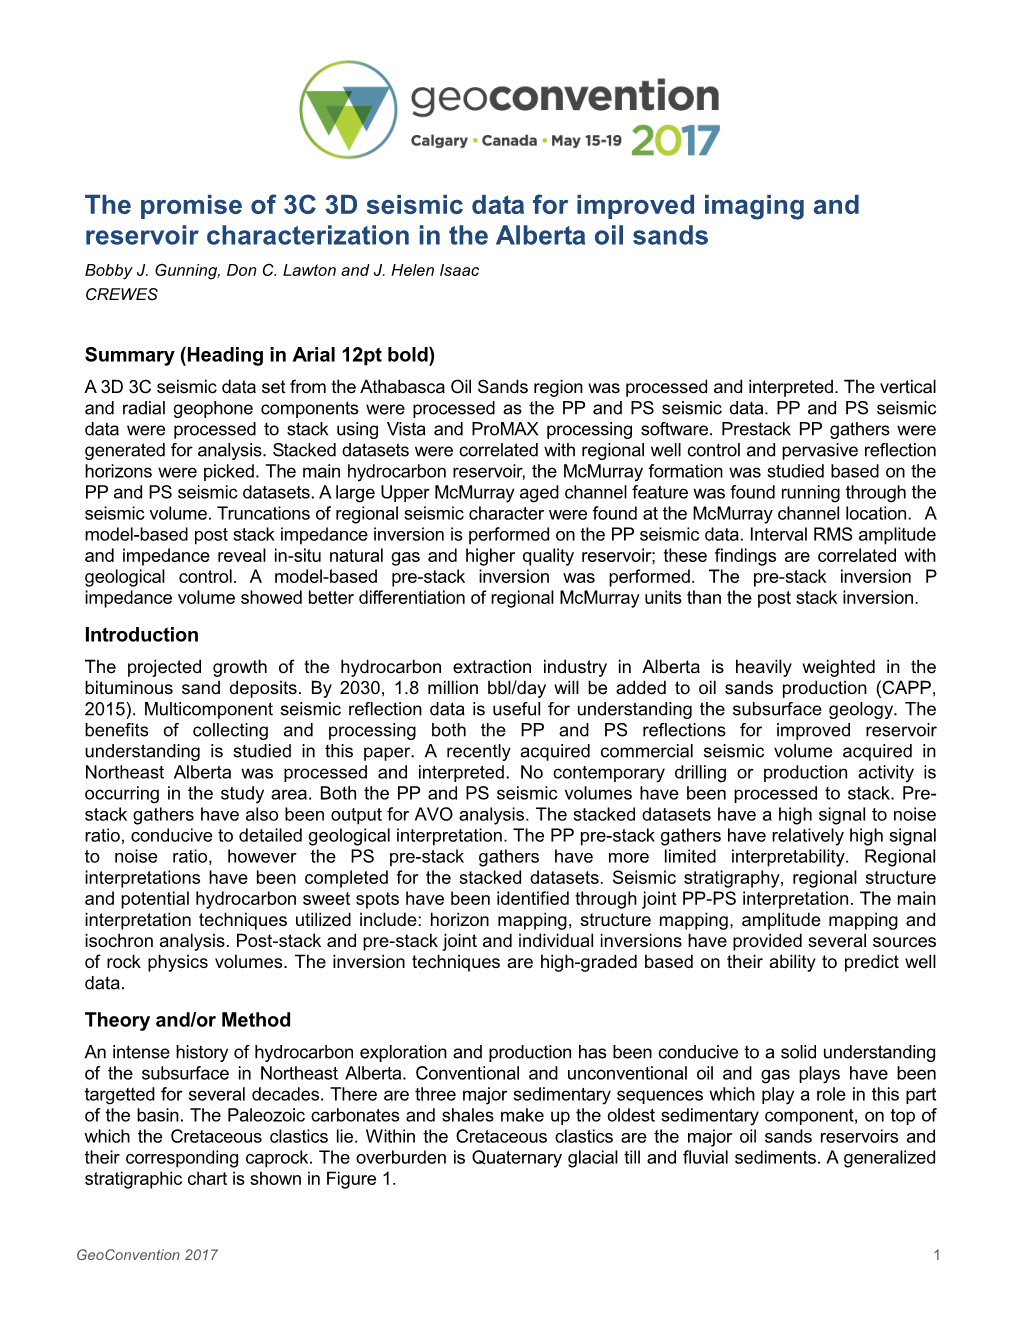 The Promise of 3C 3D Seismic Data for Improved Imaging and Reservoir Characterization in the Alberta Oil Sands Bobby J